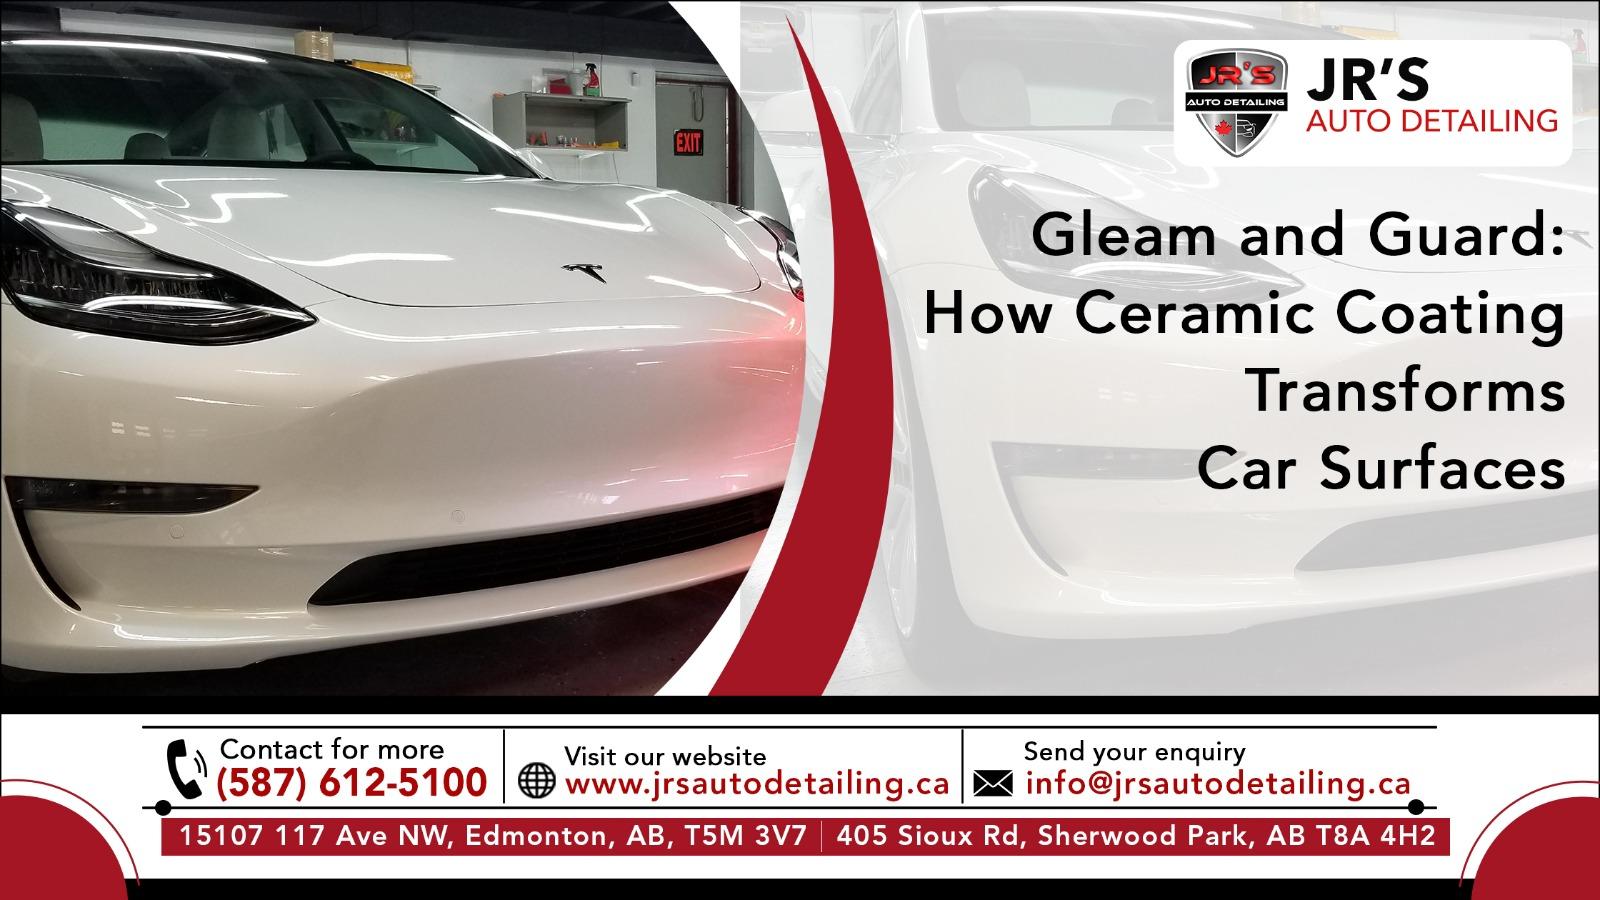 Gleam and Guard How Ceramic Coating Transforms Car Surfaces